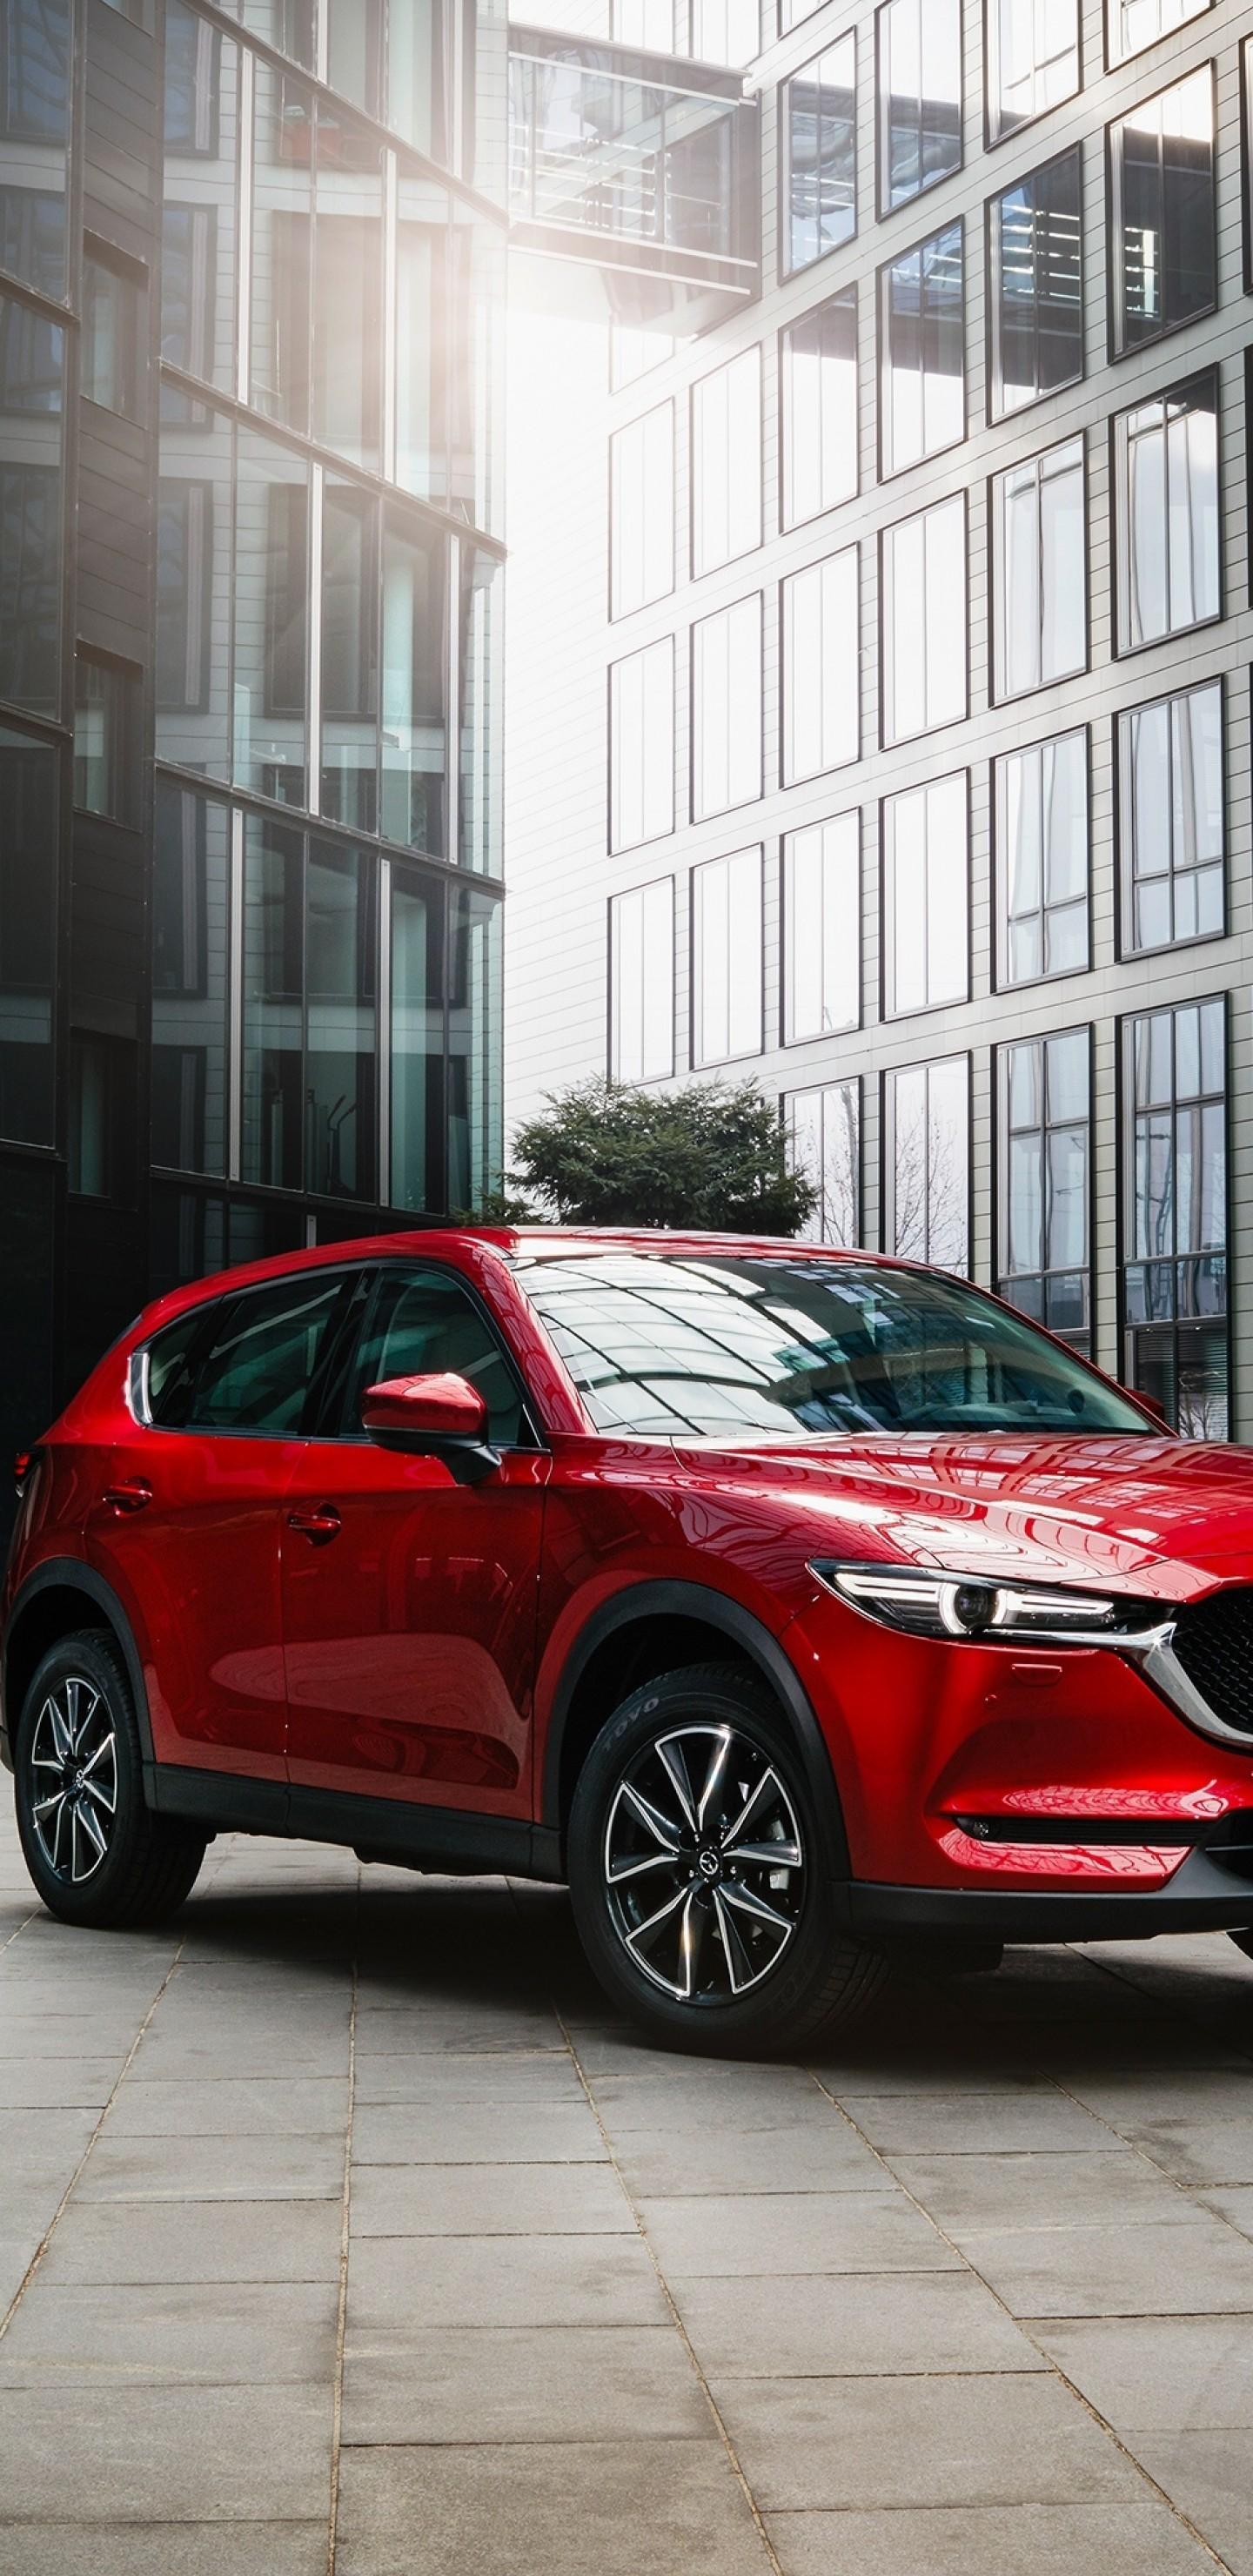 Download 1440x2960 Mazda Cx Red, Side View, Cars Wallpaper